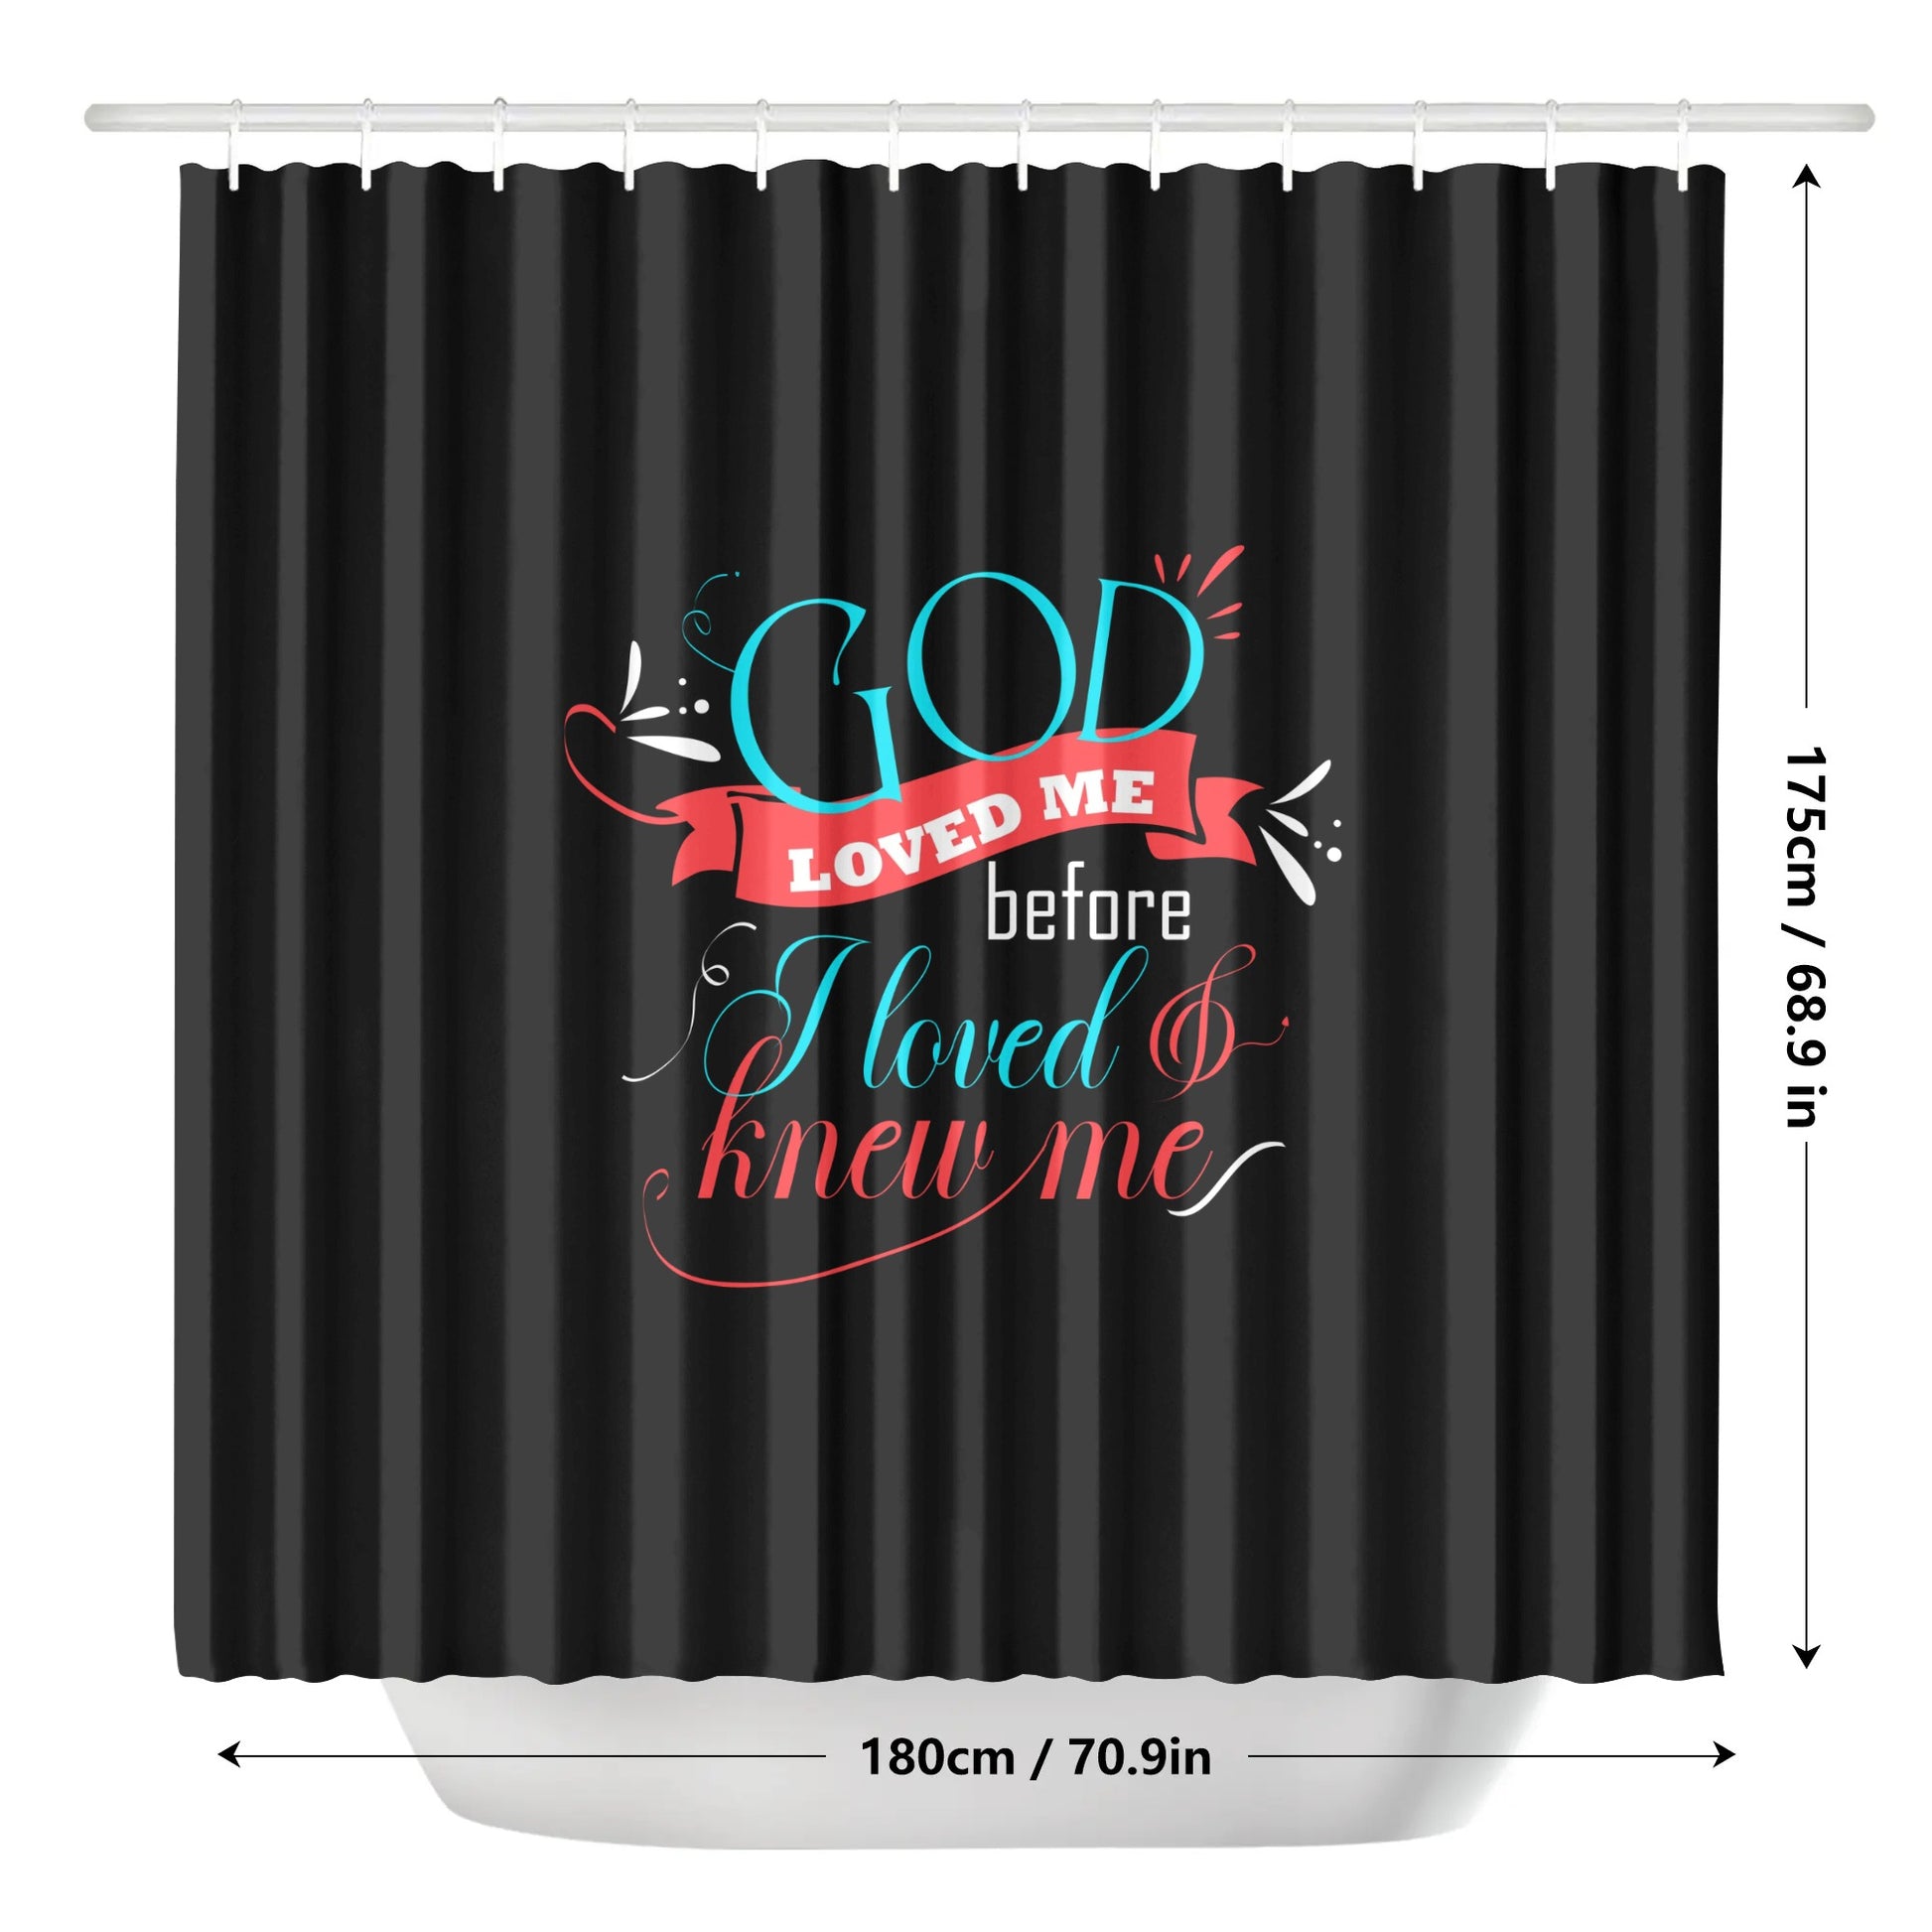 God Loved Me Before I Loved & Knew Me Christian Shower Curtain popcustoms